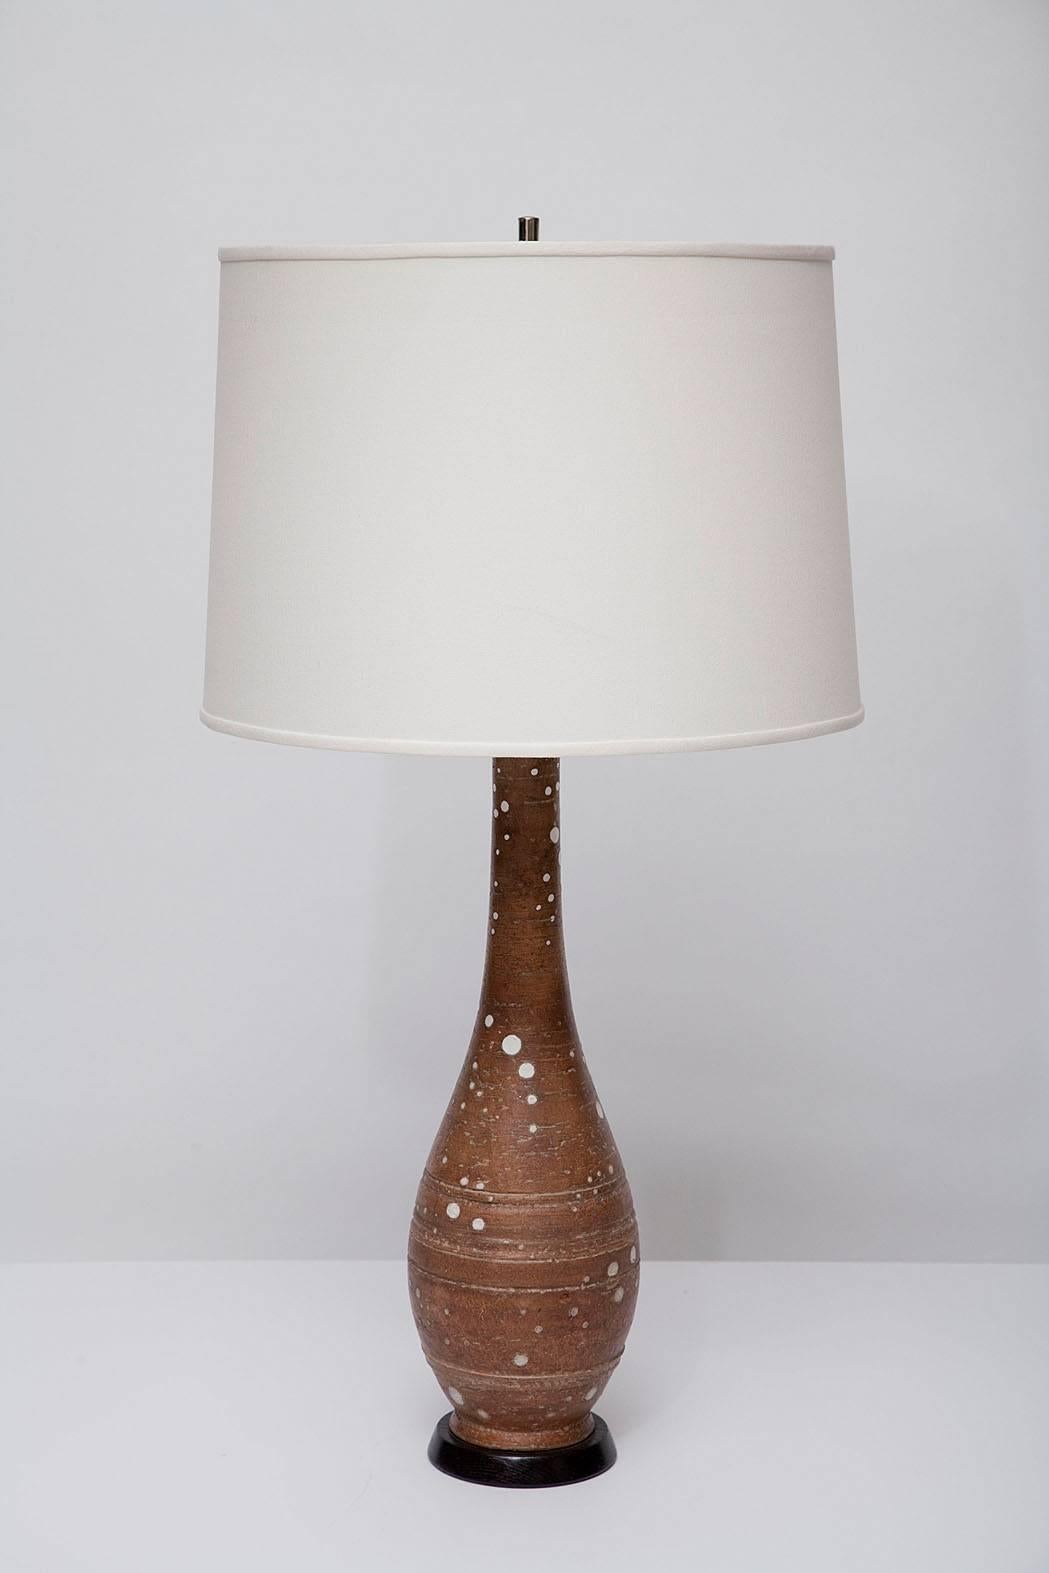 Brown stoneware lamp with random gloss-white glazed dots. Manufacturer's mark on underside. Black wood base, with new sockets and braided wiring. Measures: 28" H to top of socket. (Shade not included).